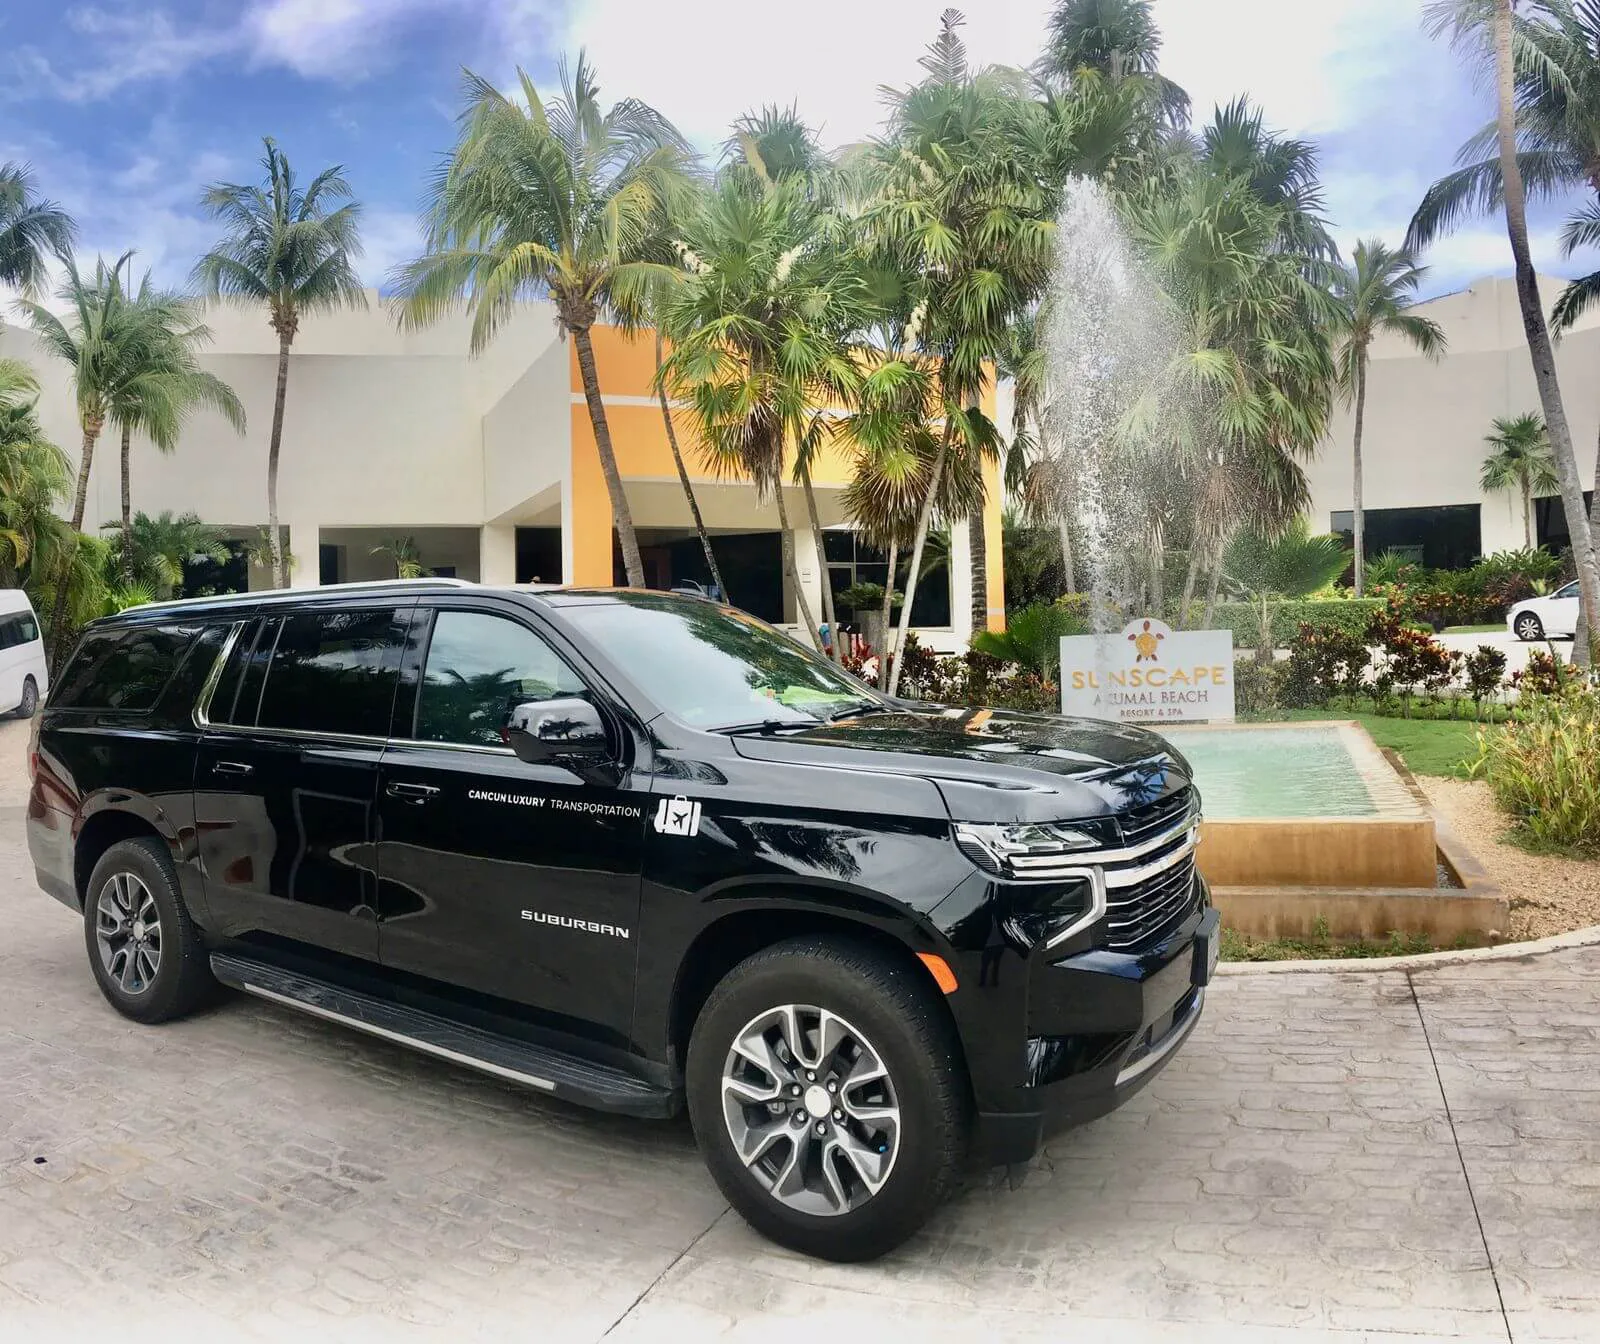 Luxury Transportation parked in front of Sunscape Akumal water fountain